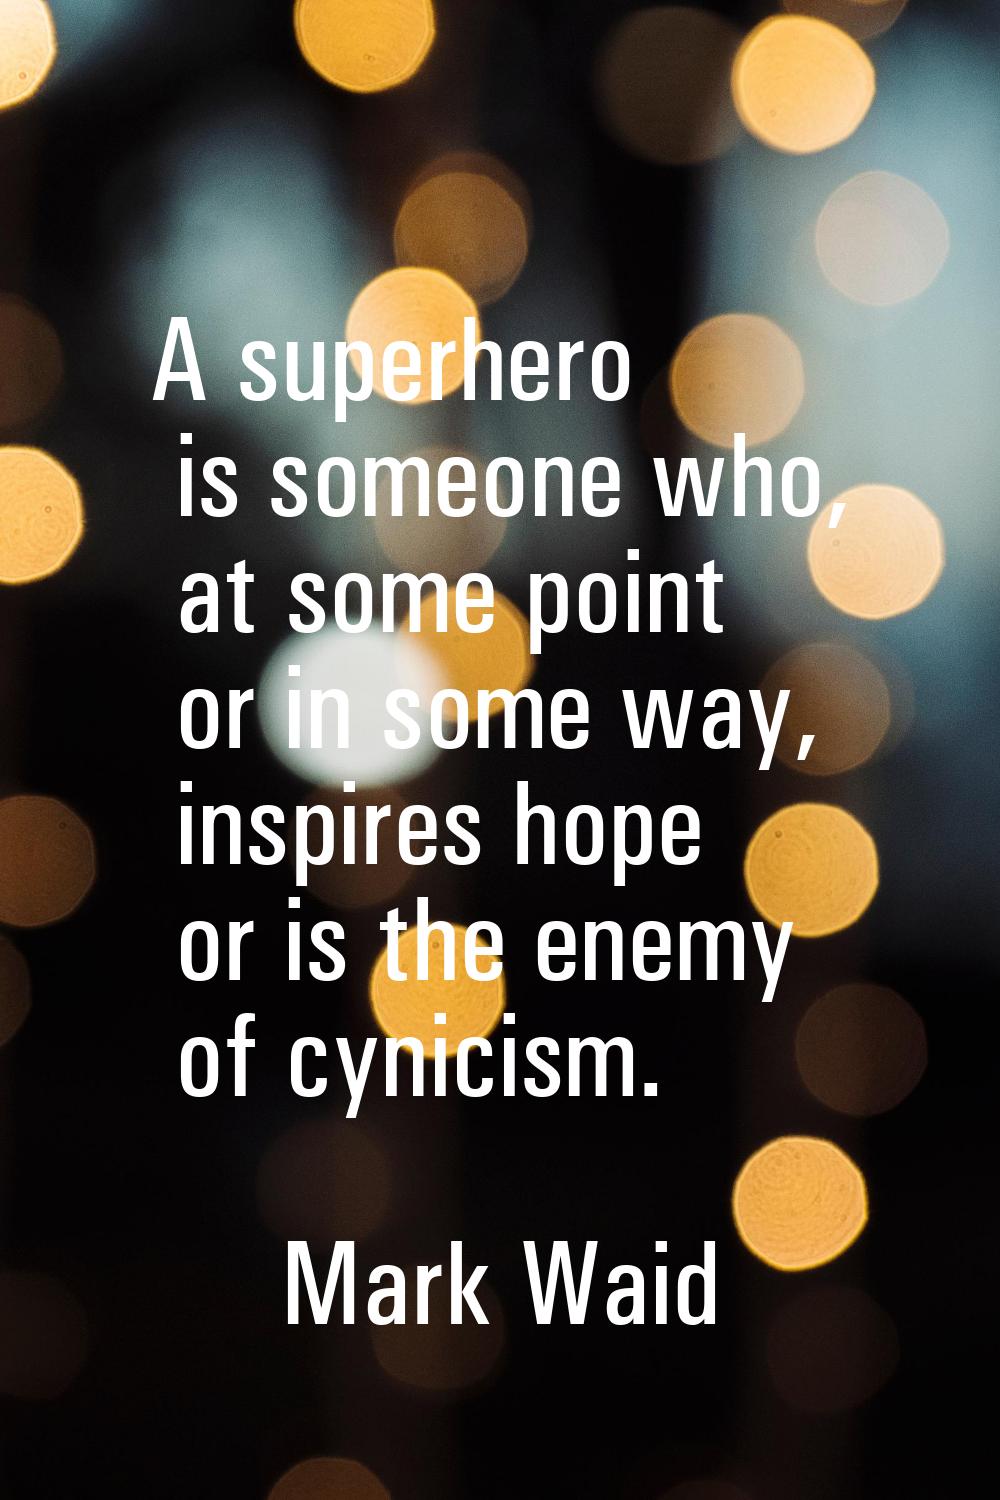 A superhero is someone who, at some point or in some way, inspires hope or is the enemy of cynicism